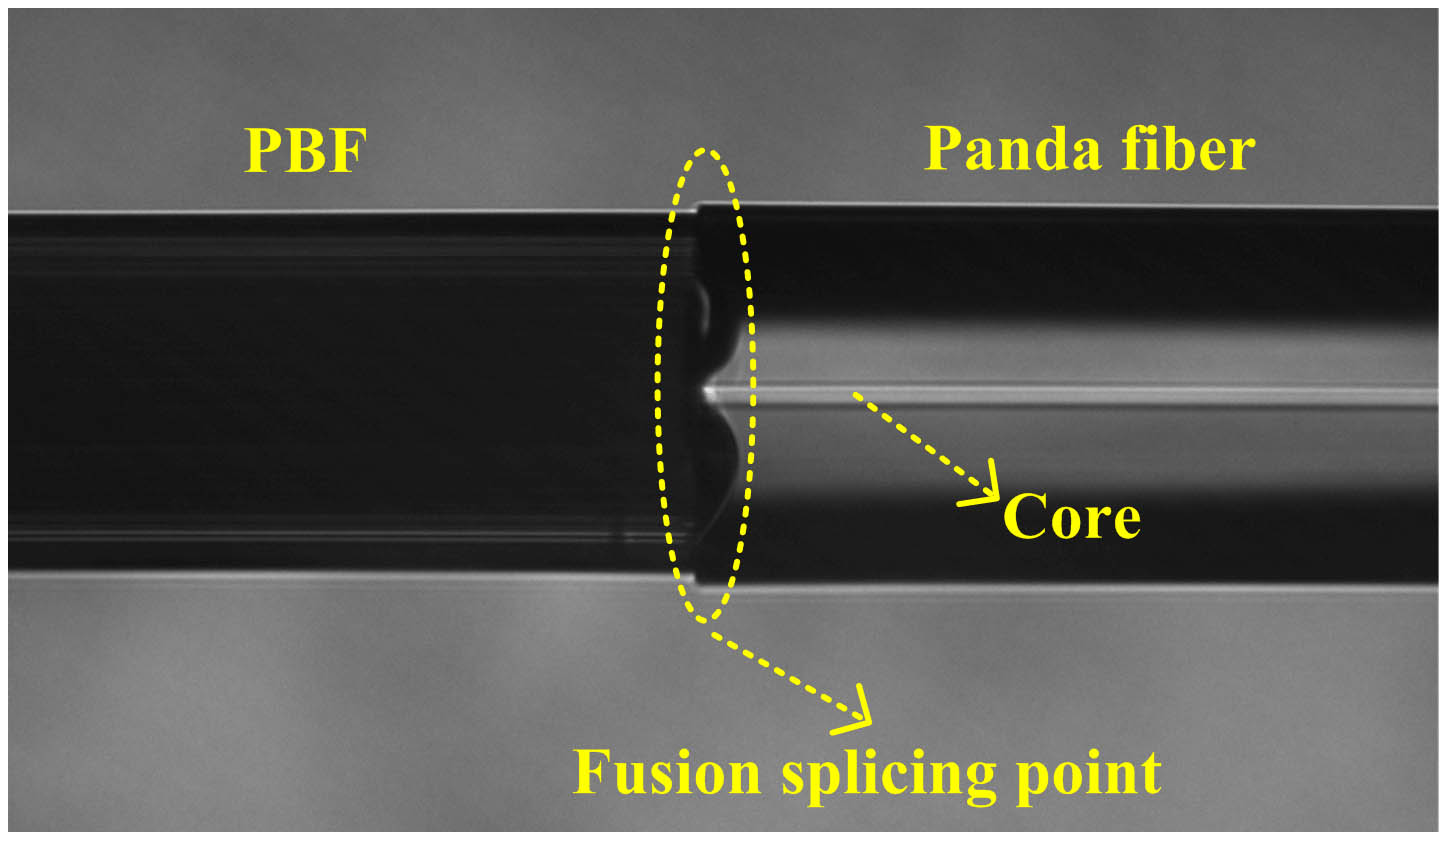 Cross section of the fusion splicing point between the PBF and the conventional Panda fiber.